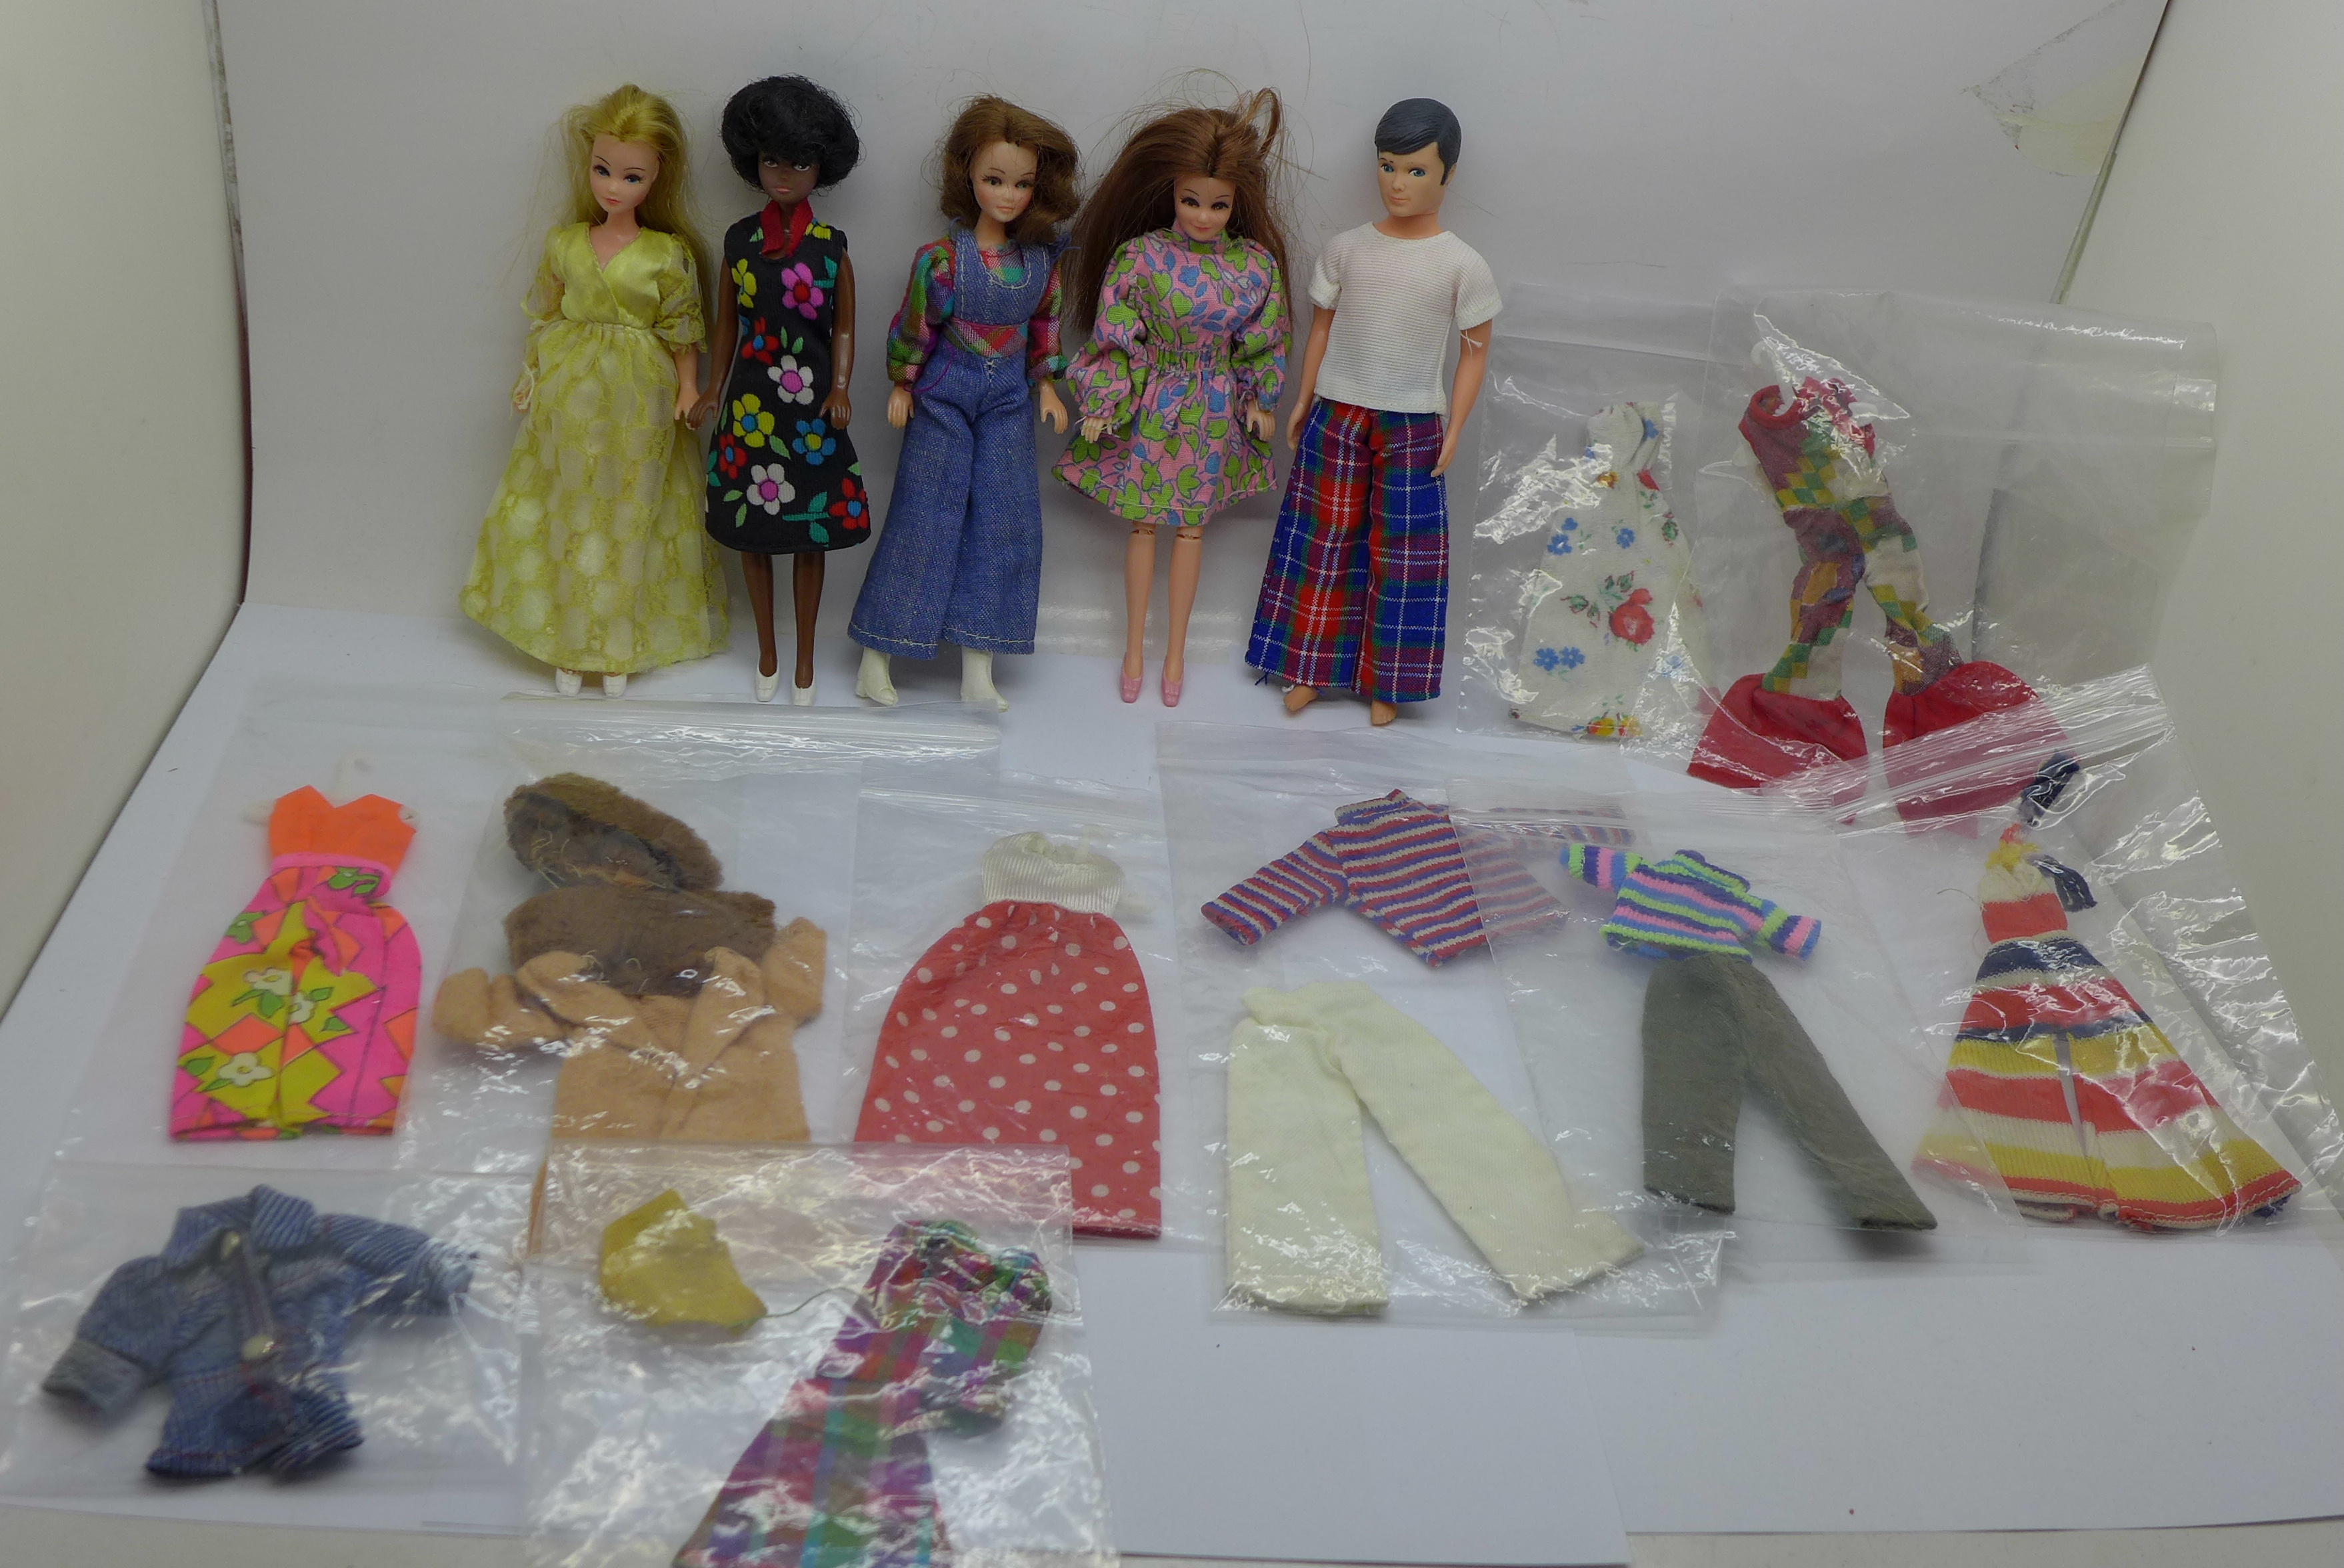 Five Pippa dolls comprising Mandy, Emma, Penny, Pete and Pippa, clothes and shoes